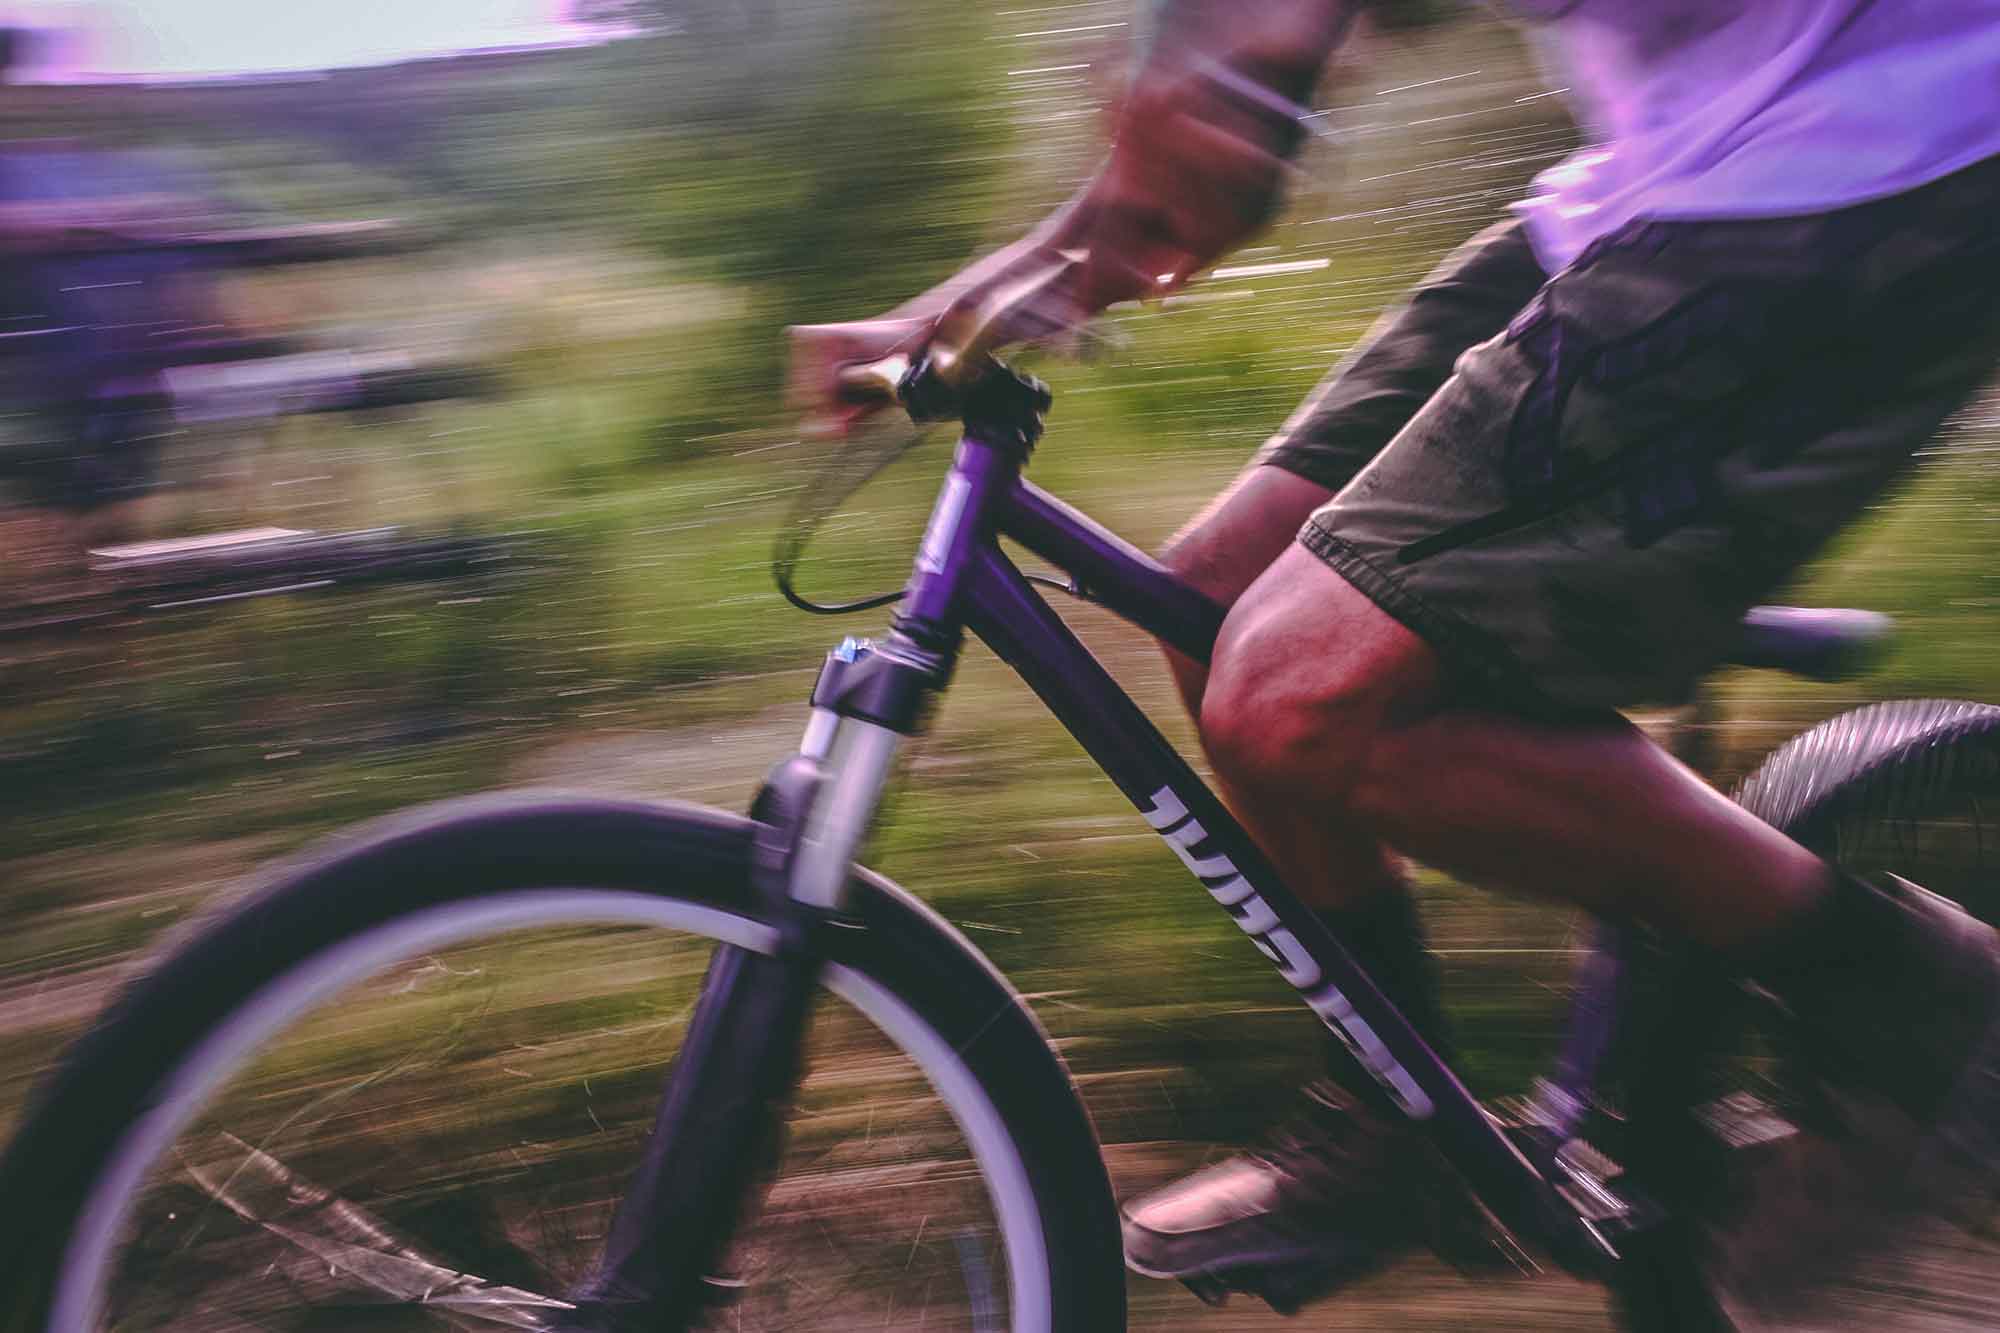 Closeup of someone riding a bicycle